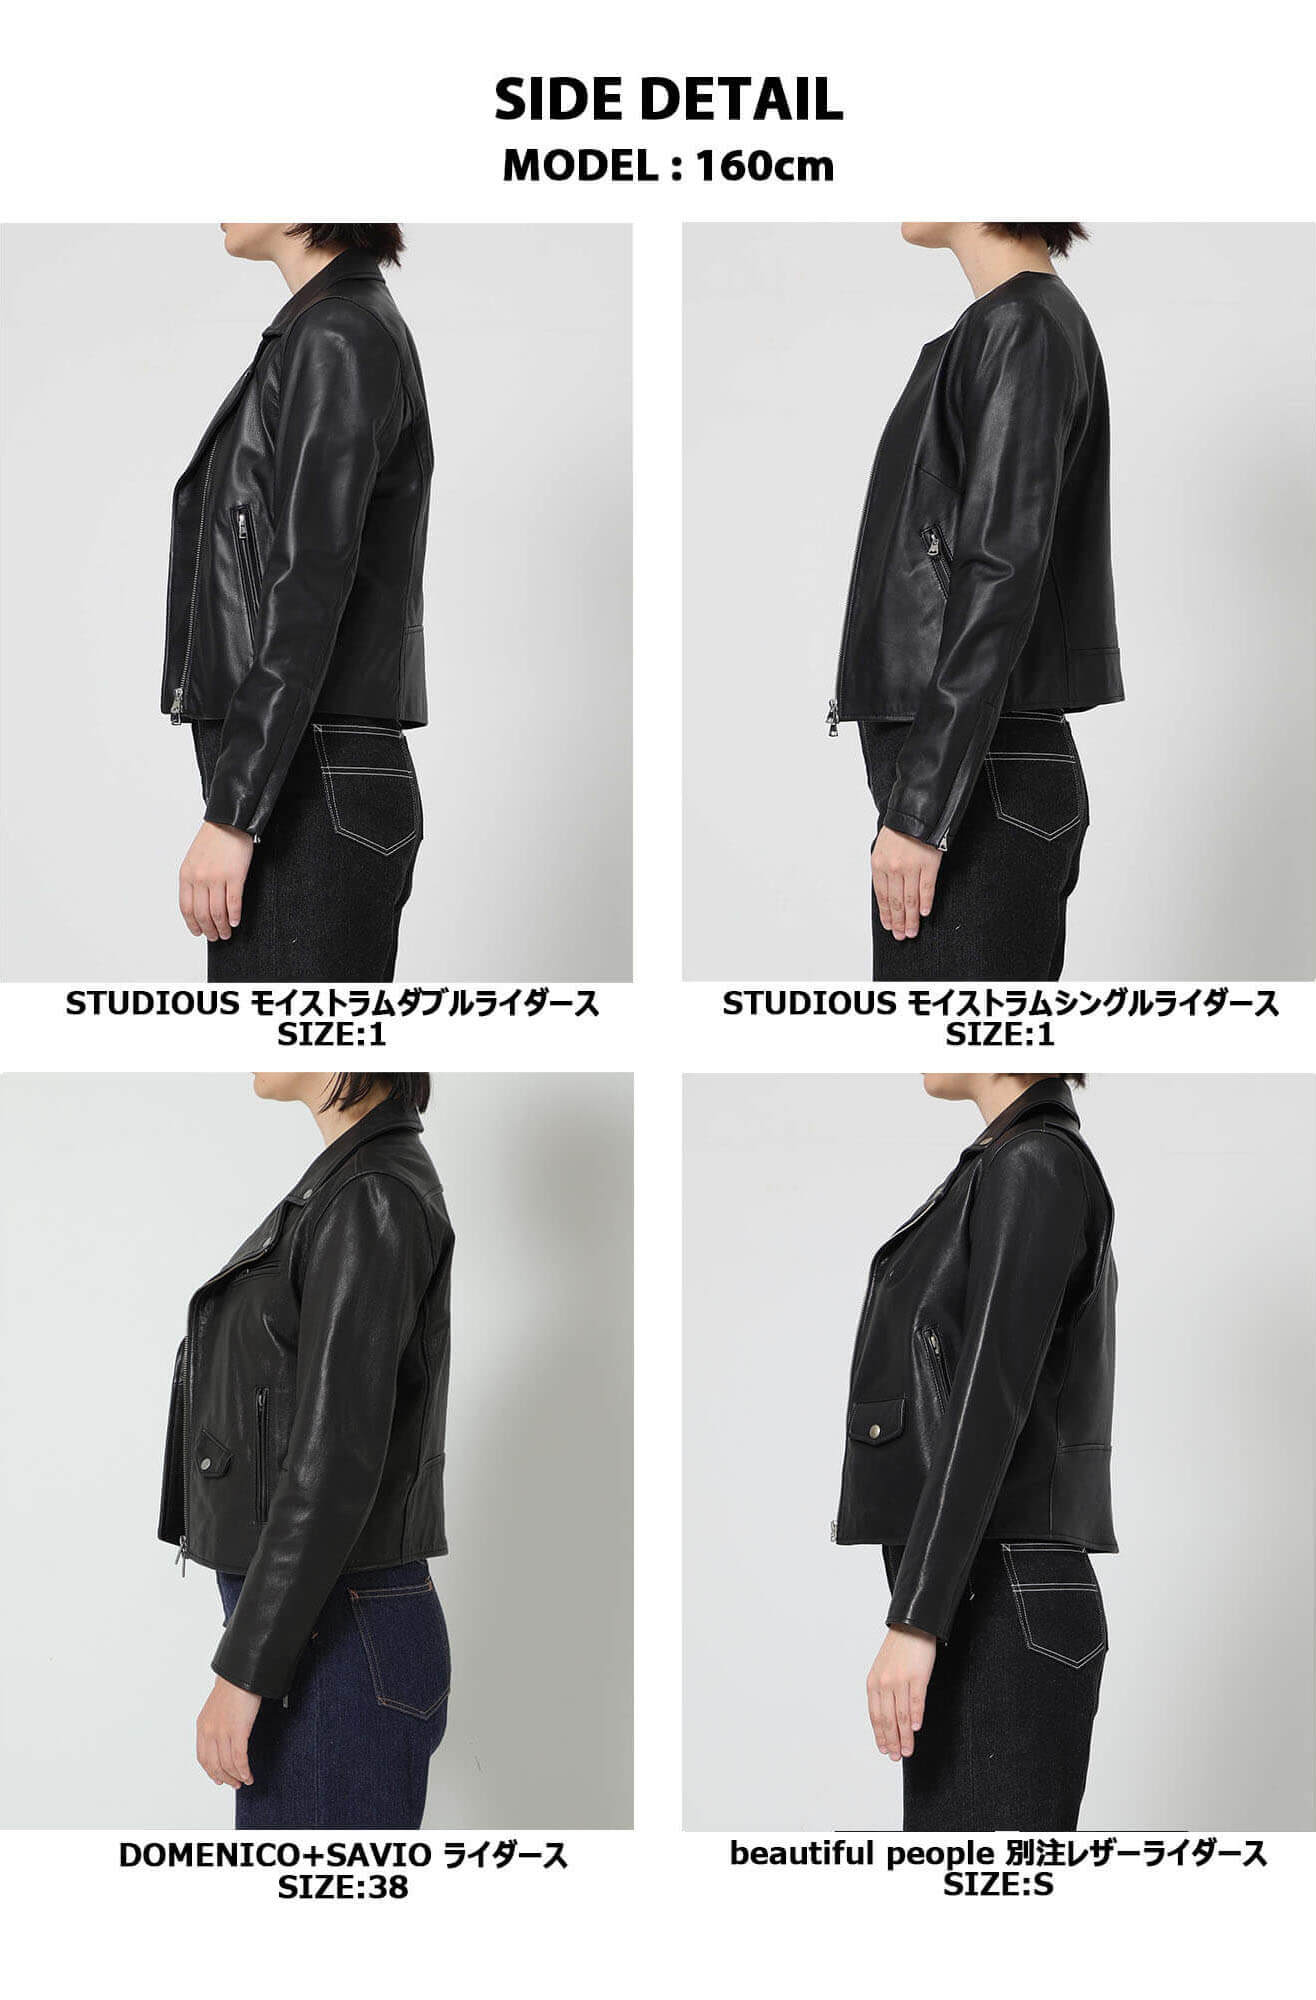 LEATHER COLLECTION 2020 A/W｜ STUDIOUS ONLINE公式通販サイト